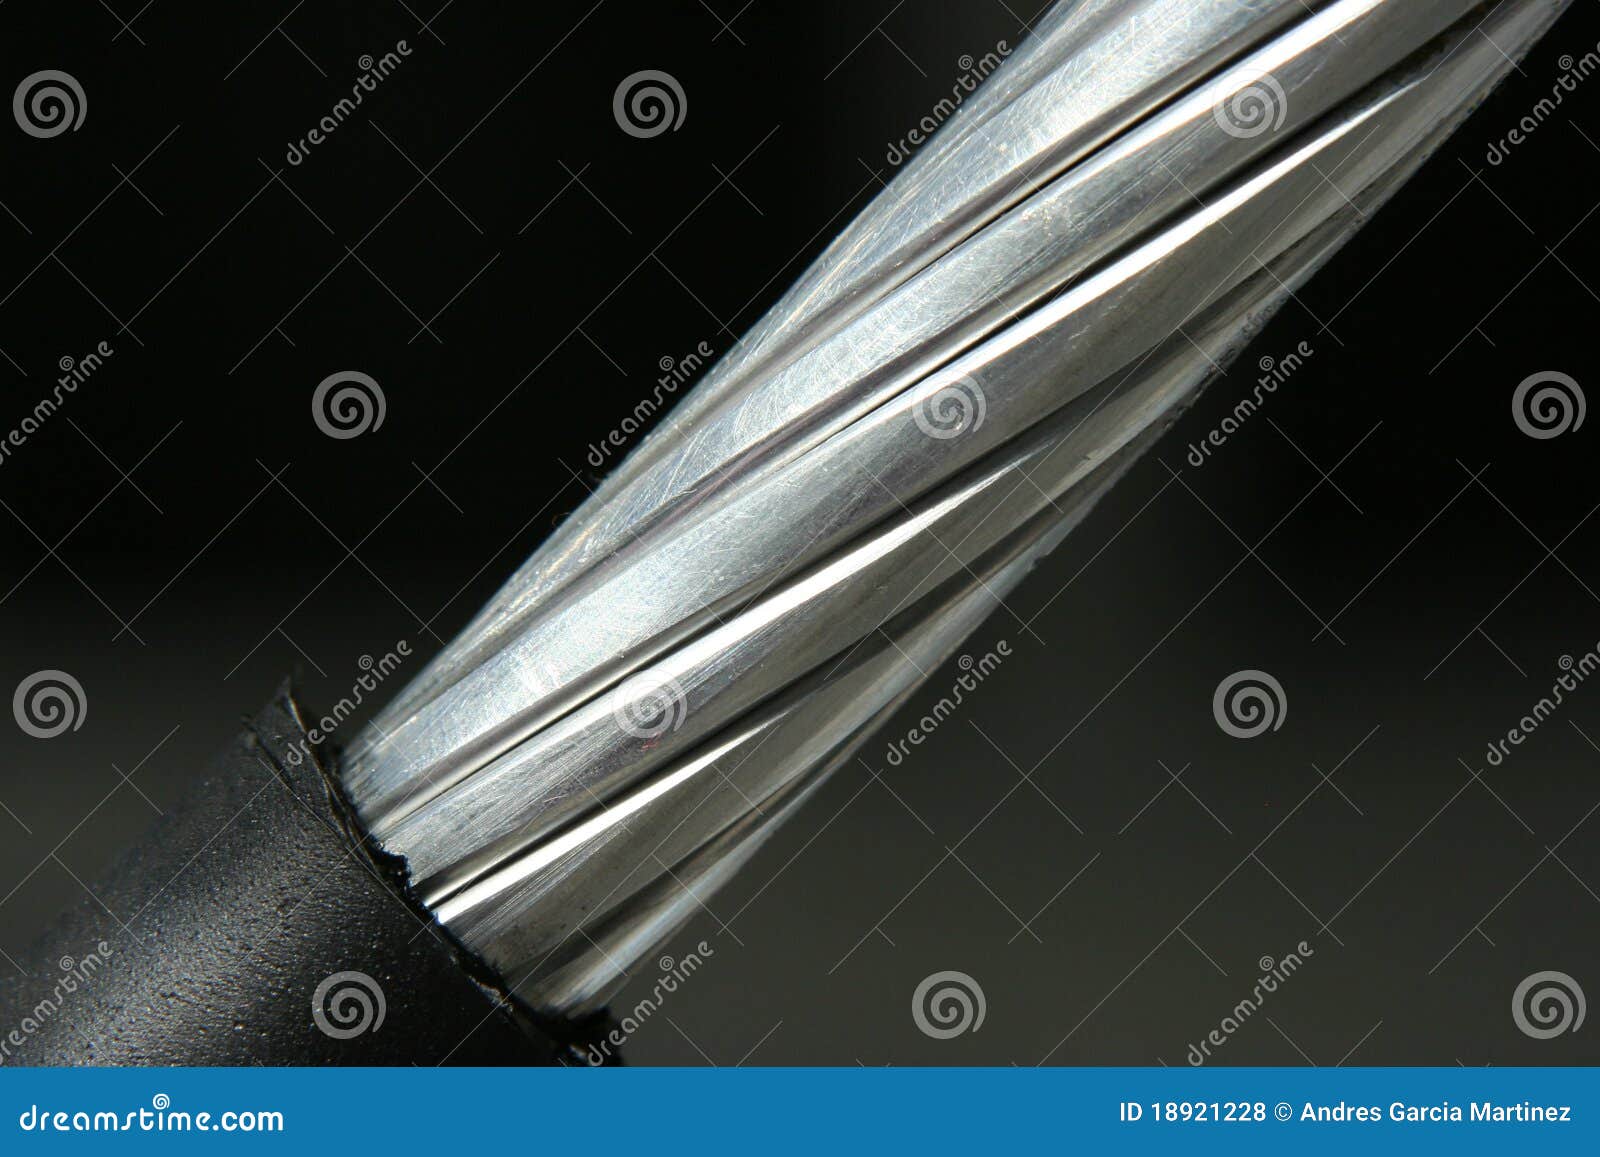 Steel cable stock photo. Image of conductor, utensil - 18921228